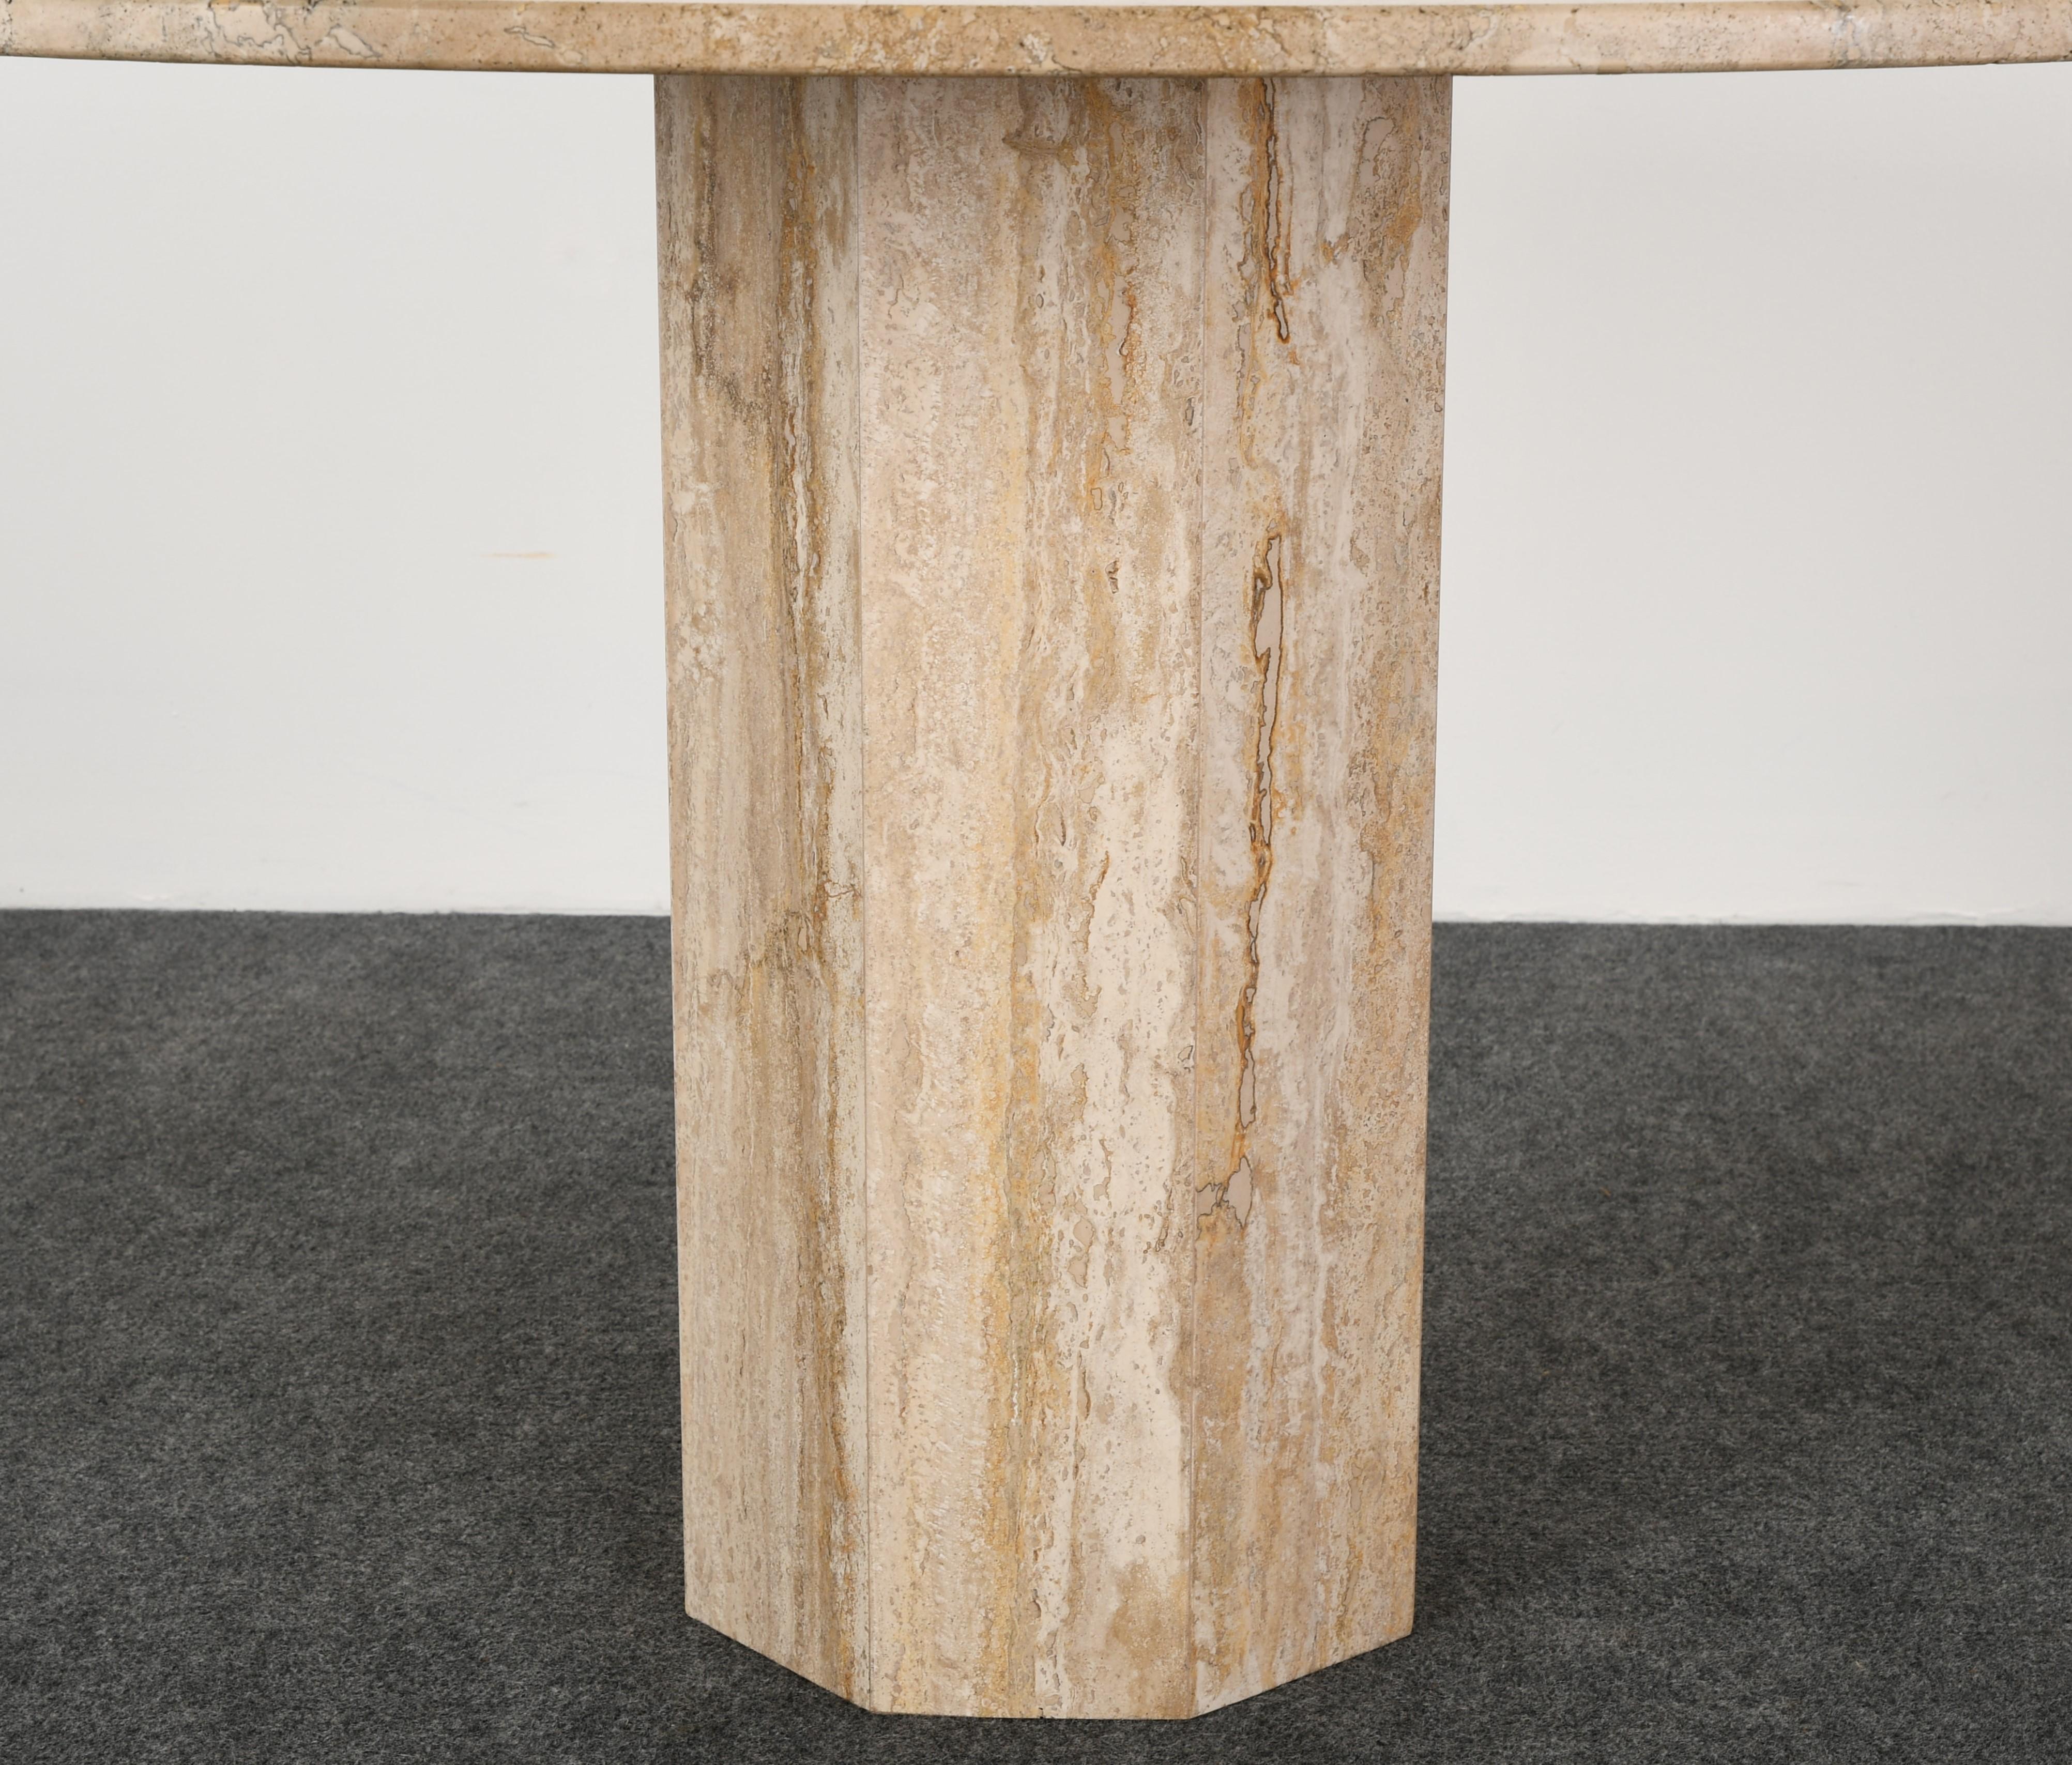 Italian Roche Bobois Style Round Travertine Marble Dining Table, 1970s